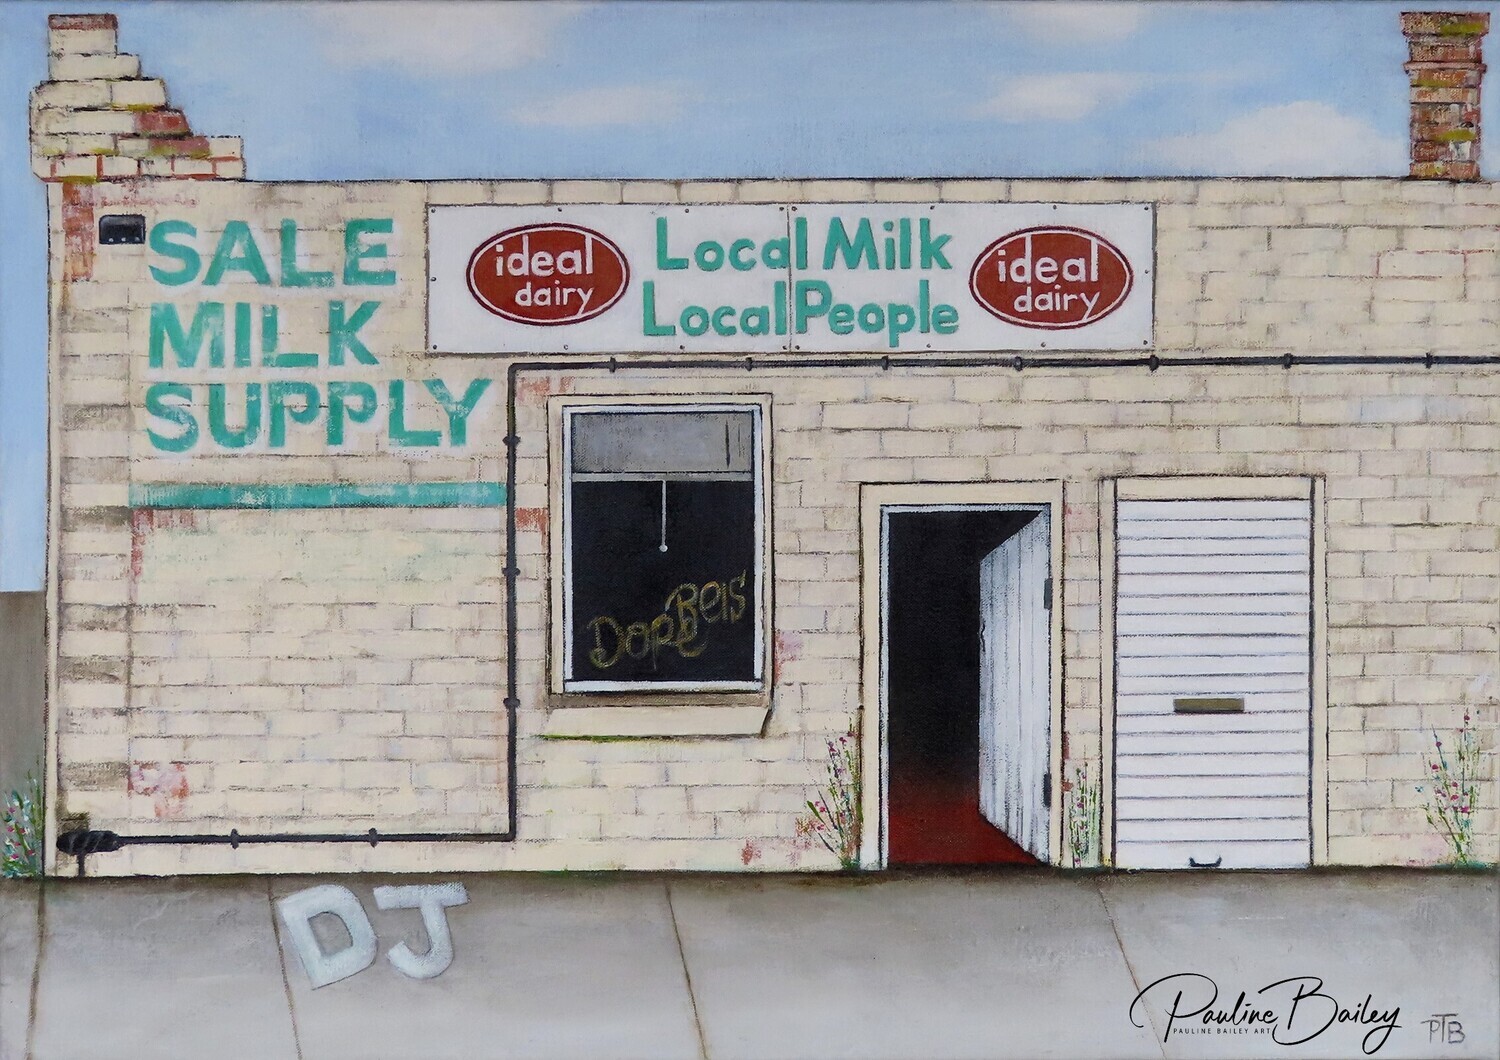 Original painting - Sale Milk Supply. *On display at the Criterion Hotel, Sale (payment and pickup options in description)